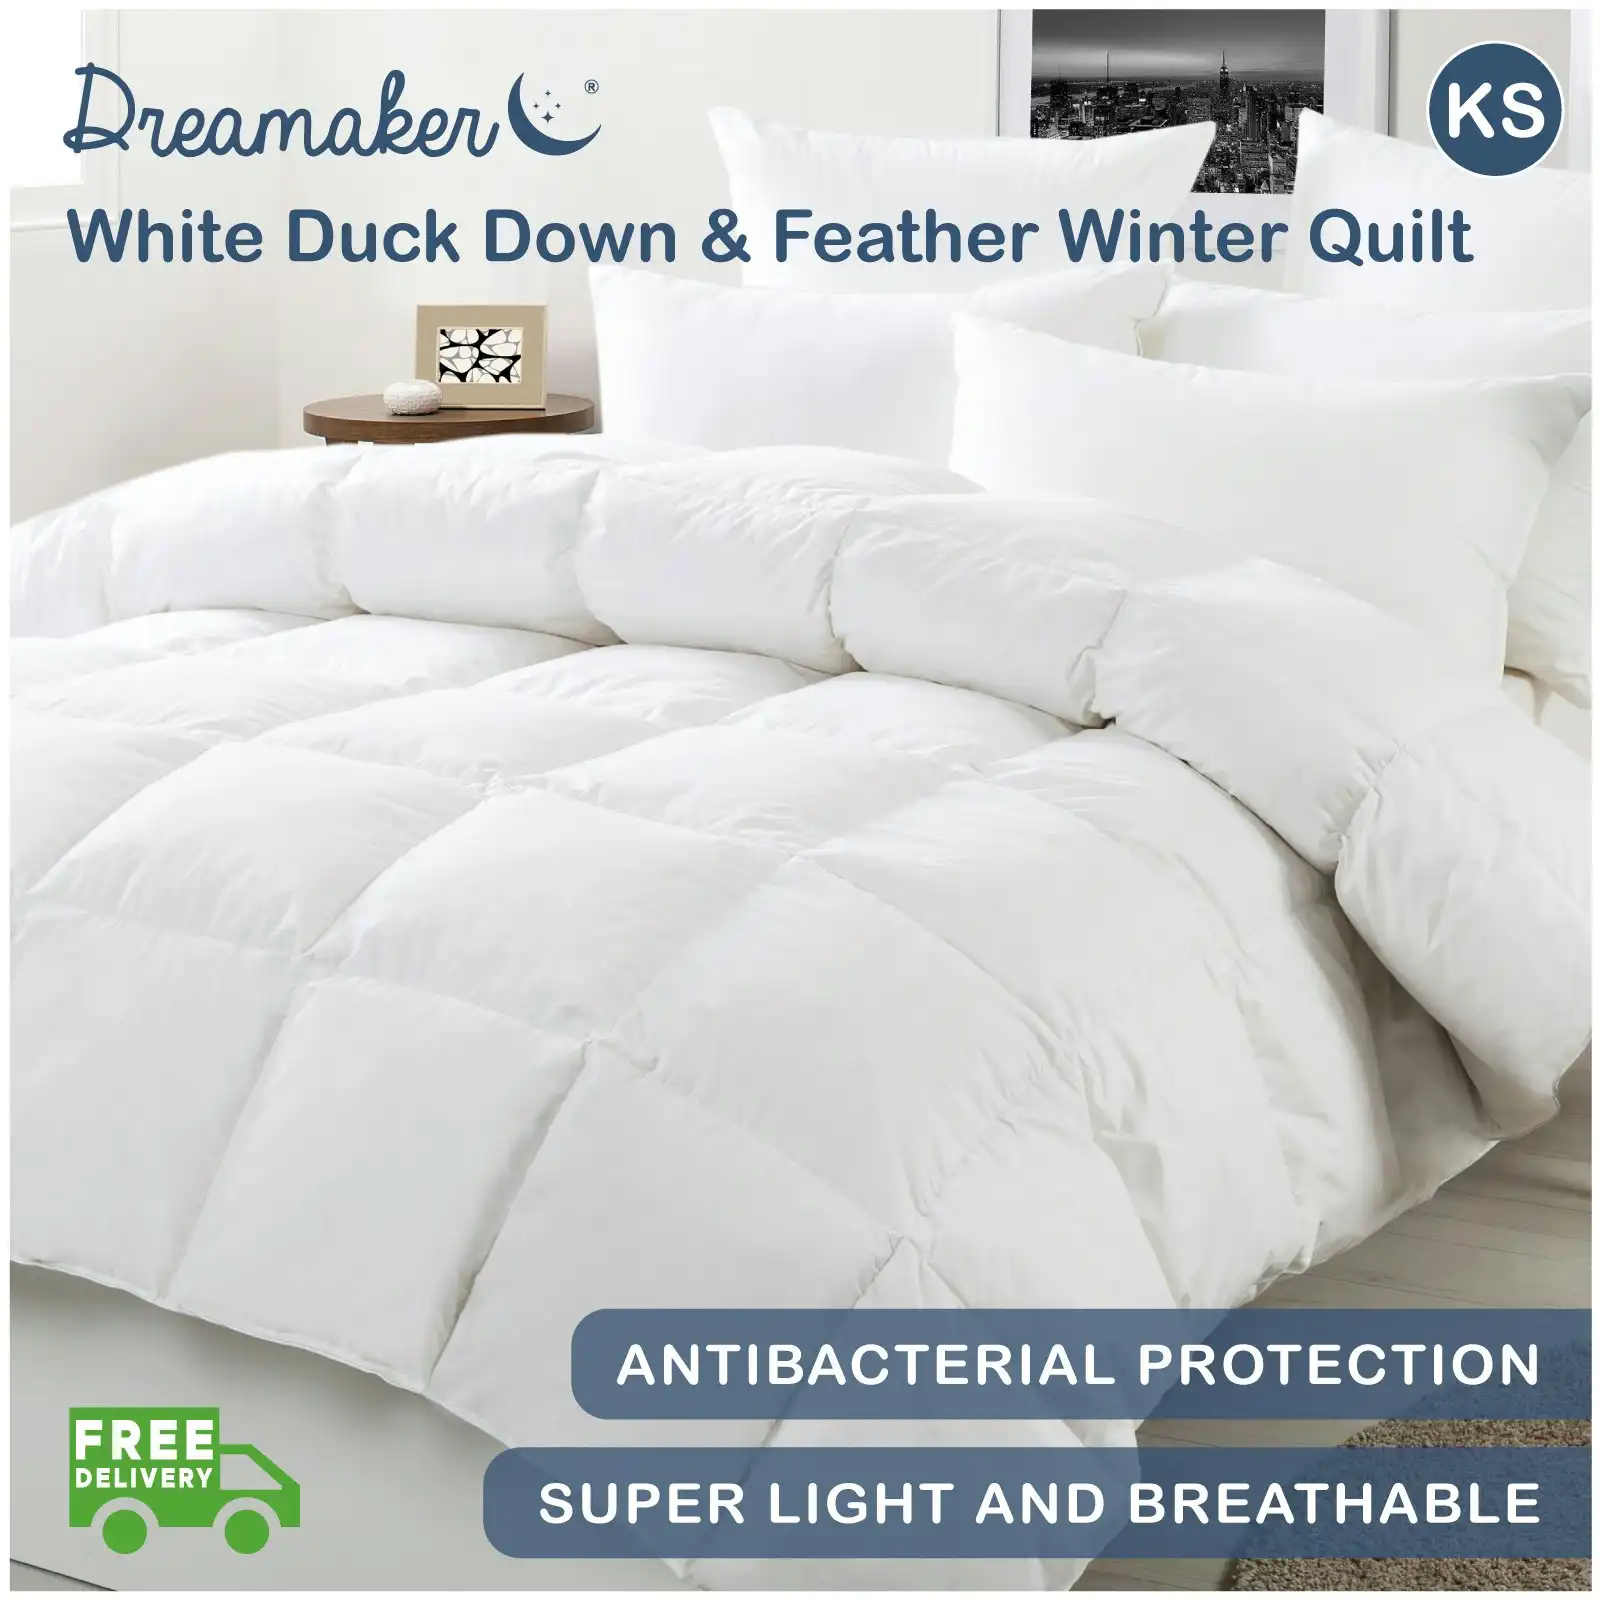 Dreamaker White Duck Down & Feather Winter Quilt King Single Bed (TW Exclusive)